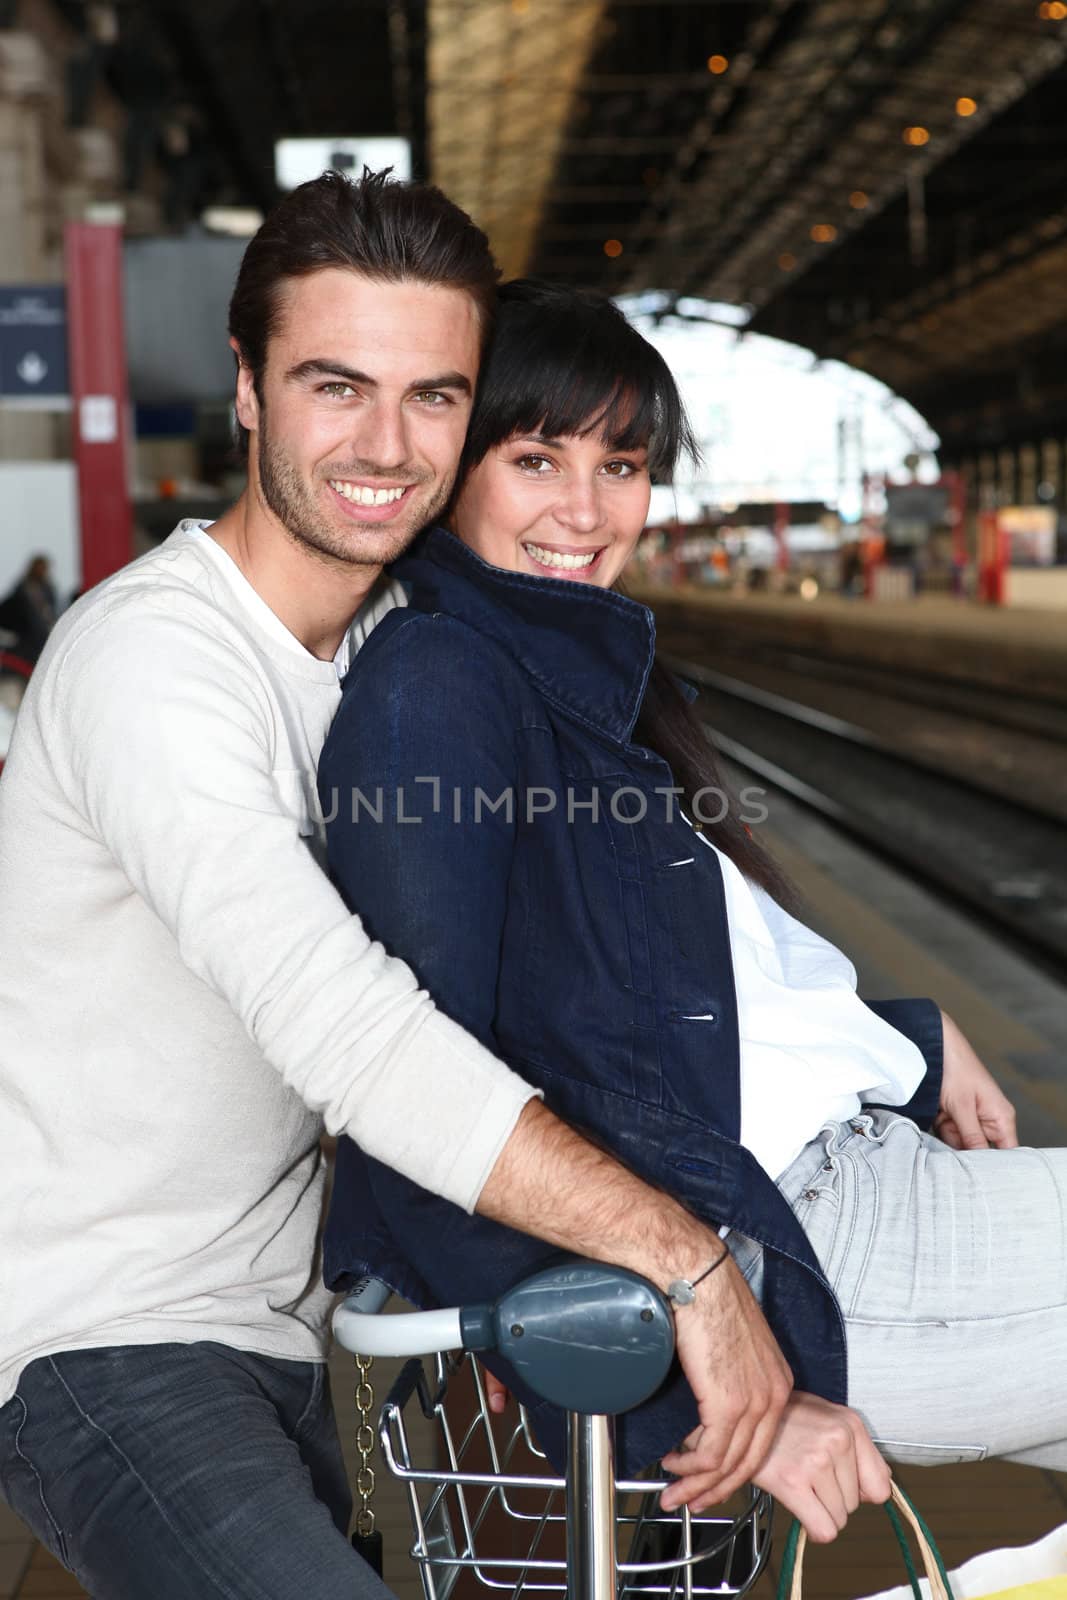 Couple waiting for the train by phovoir